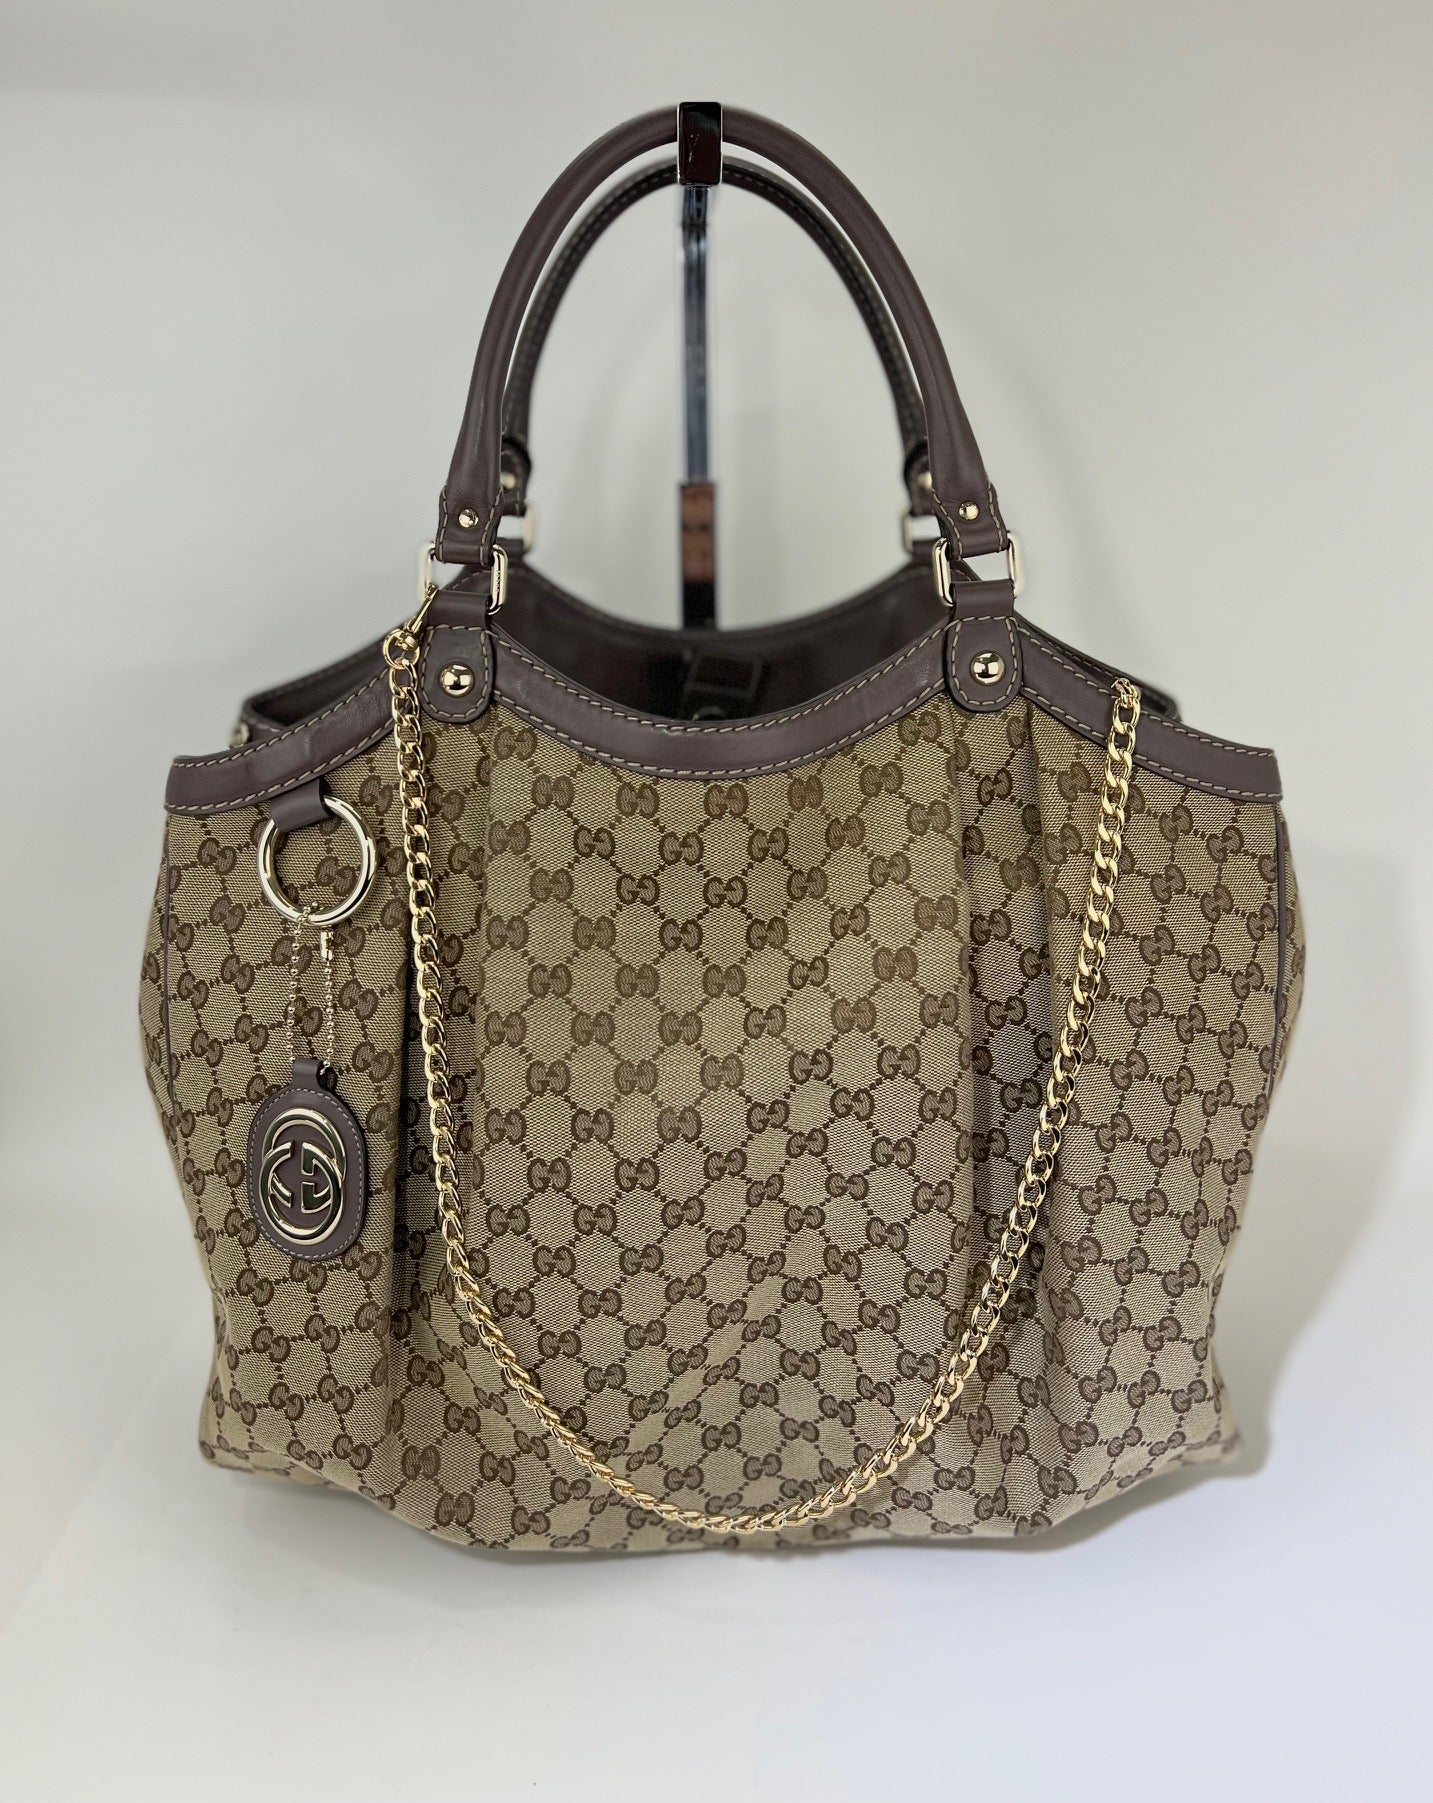 At Auction: Gucci Ivory Woven Leather Sukey Tote Bag